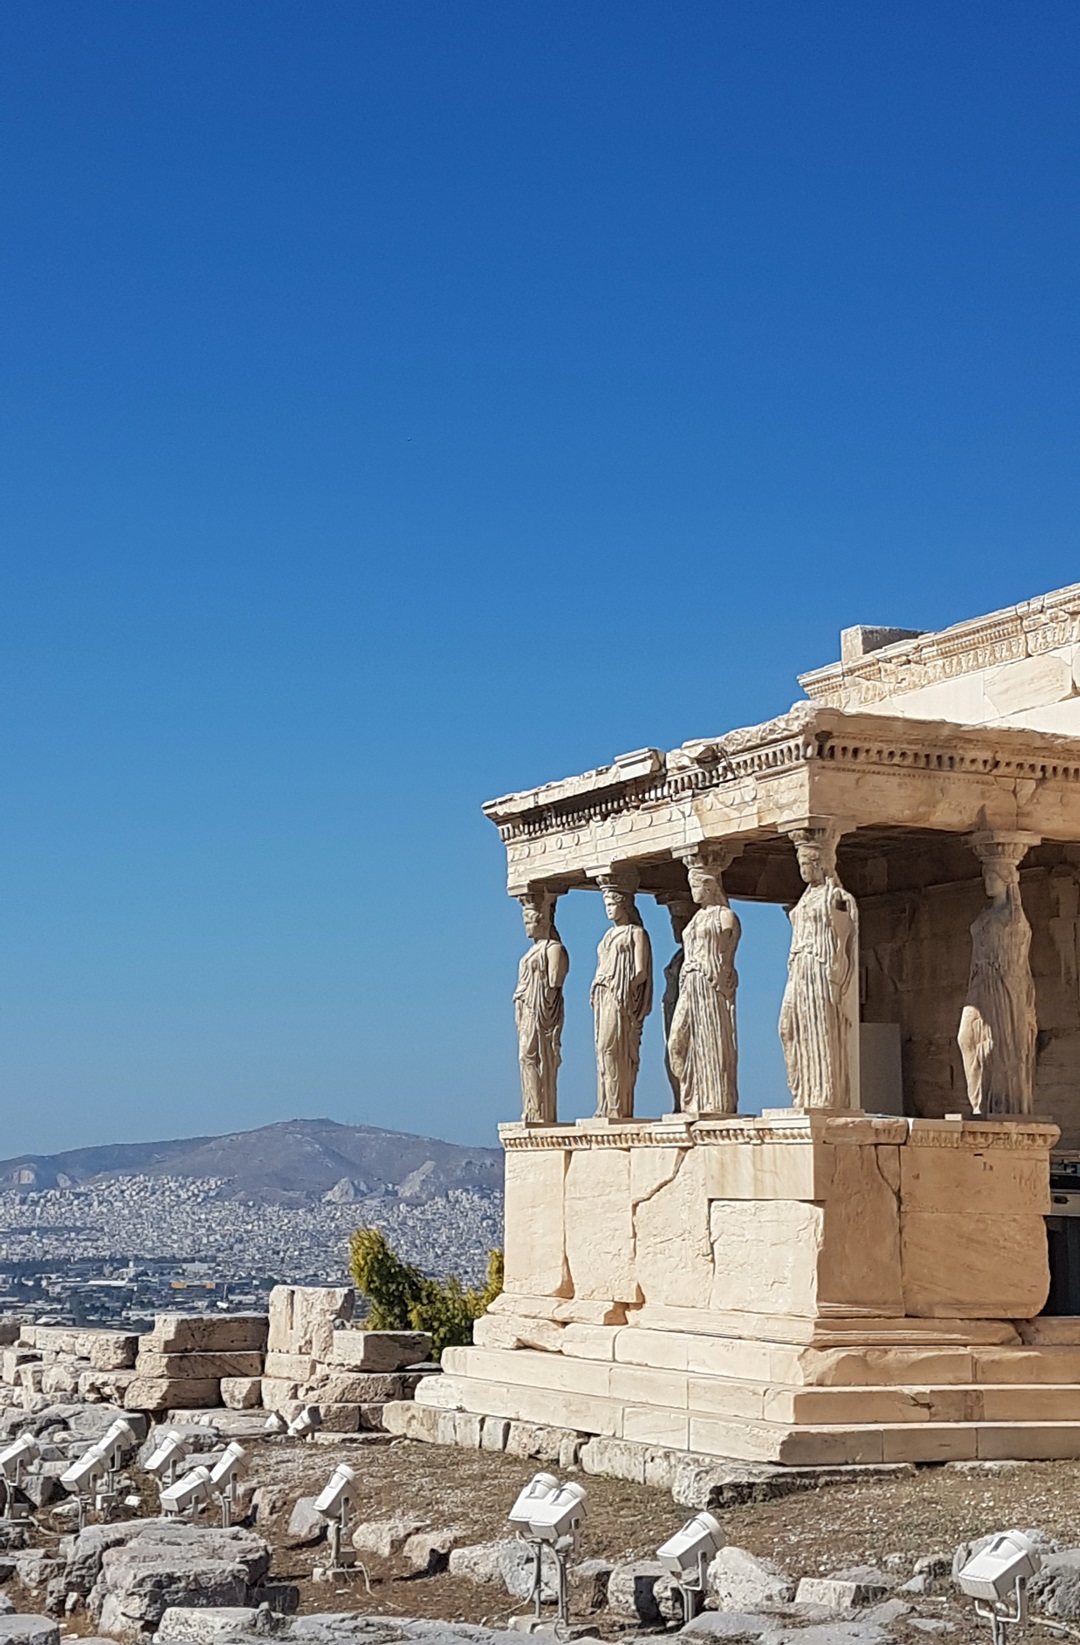 Athens, Greece A Caryatid Is A Sculpted Female Sculptural Figure Used As A Pillar, Serving As An Architectural Support. The Greek Term Karyatides Comes From An Ancient Town In The Peloponnese, Meaning "Daughters Of Karyai"